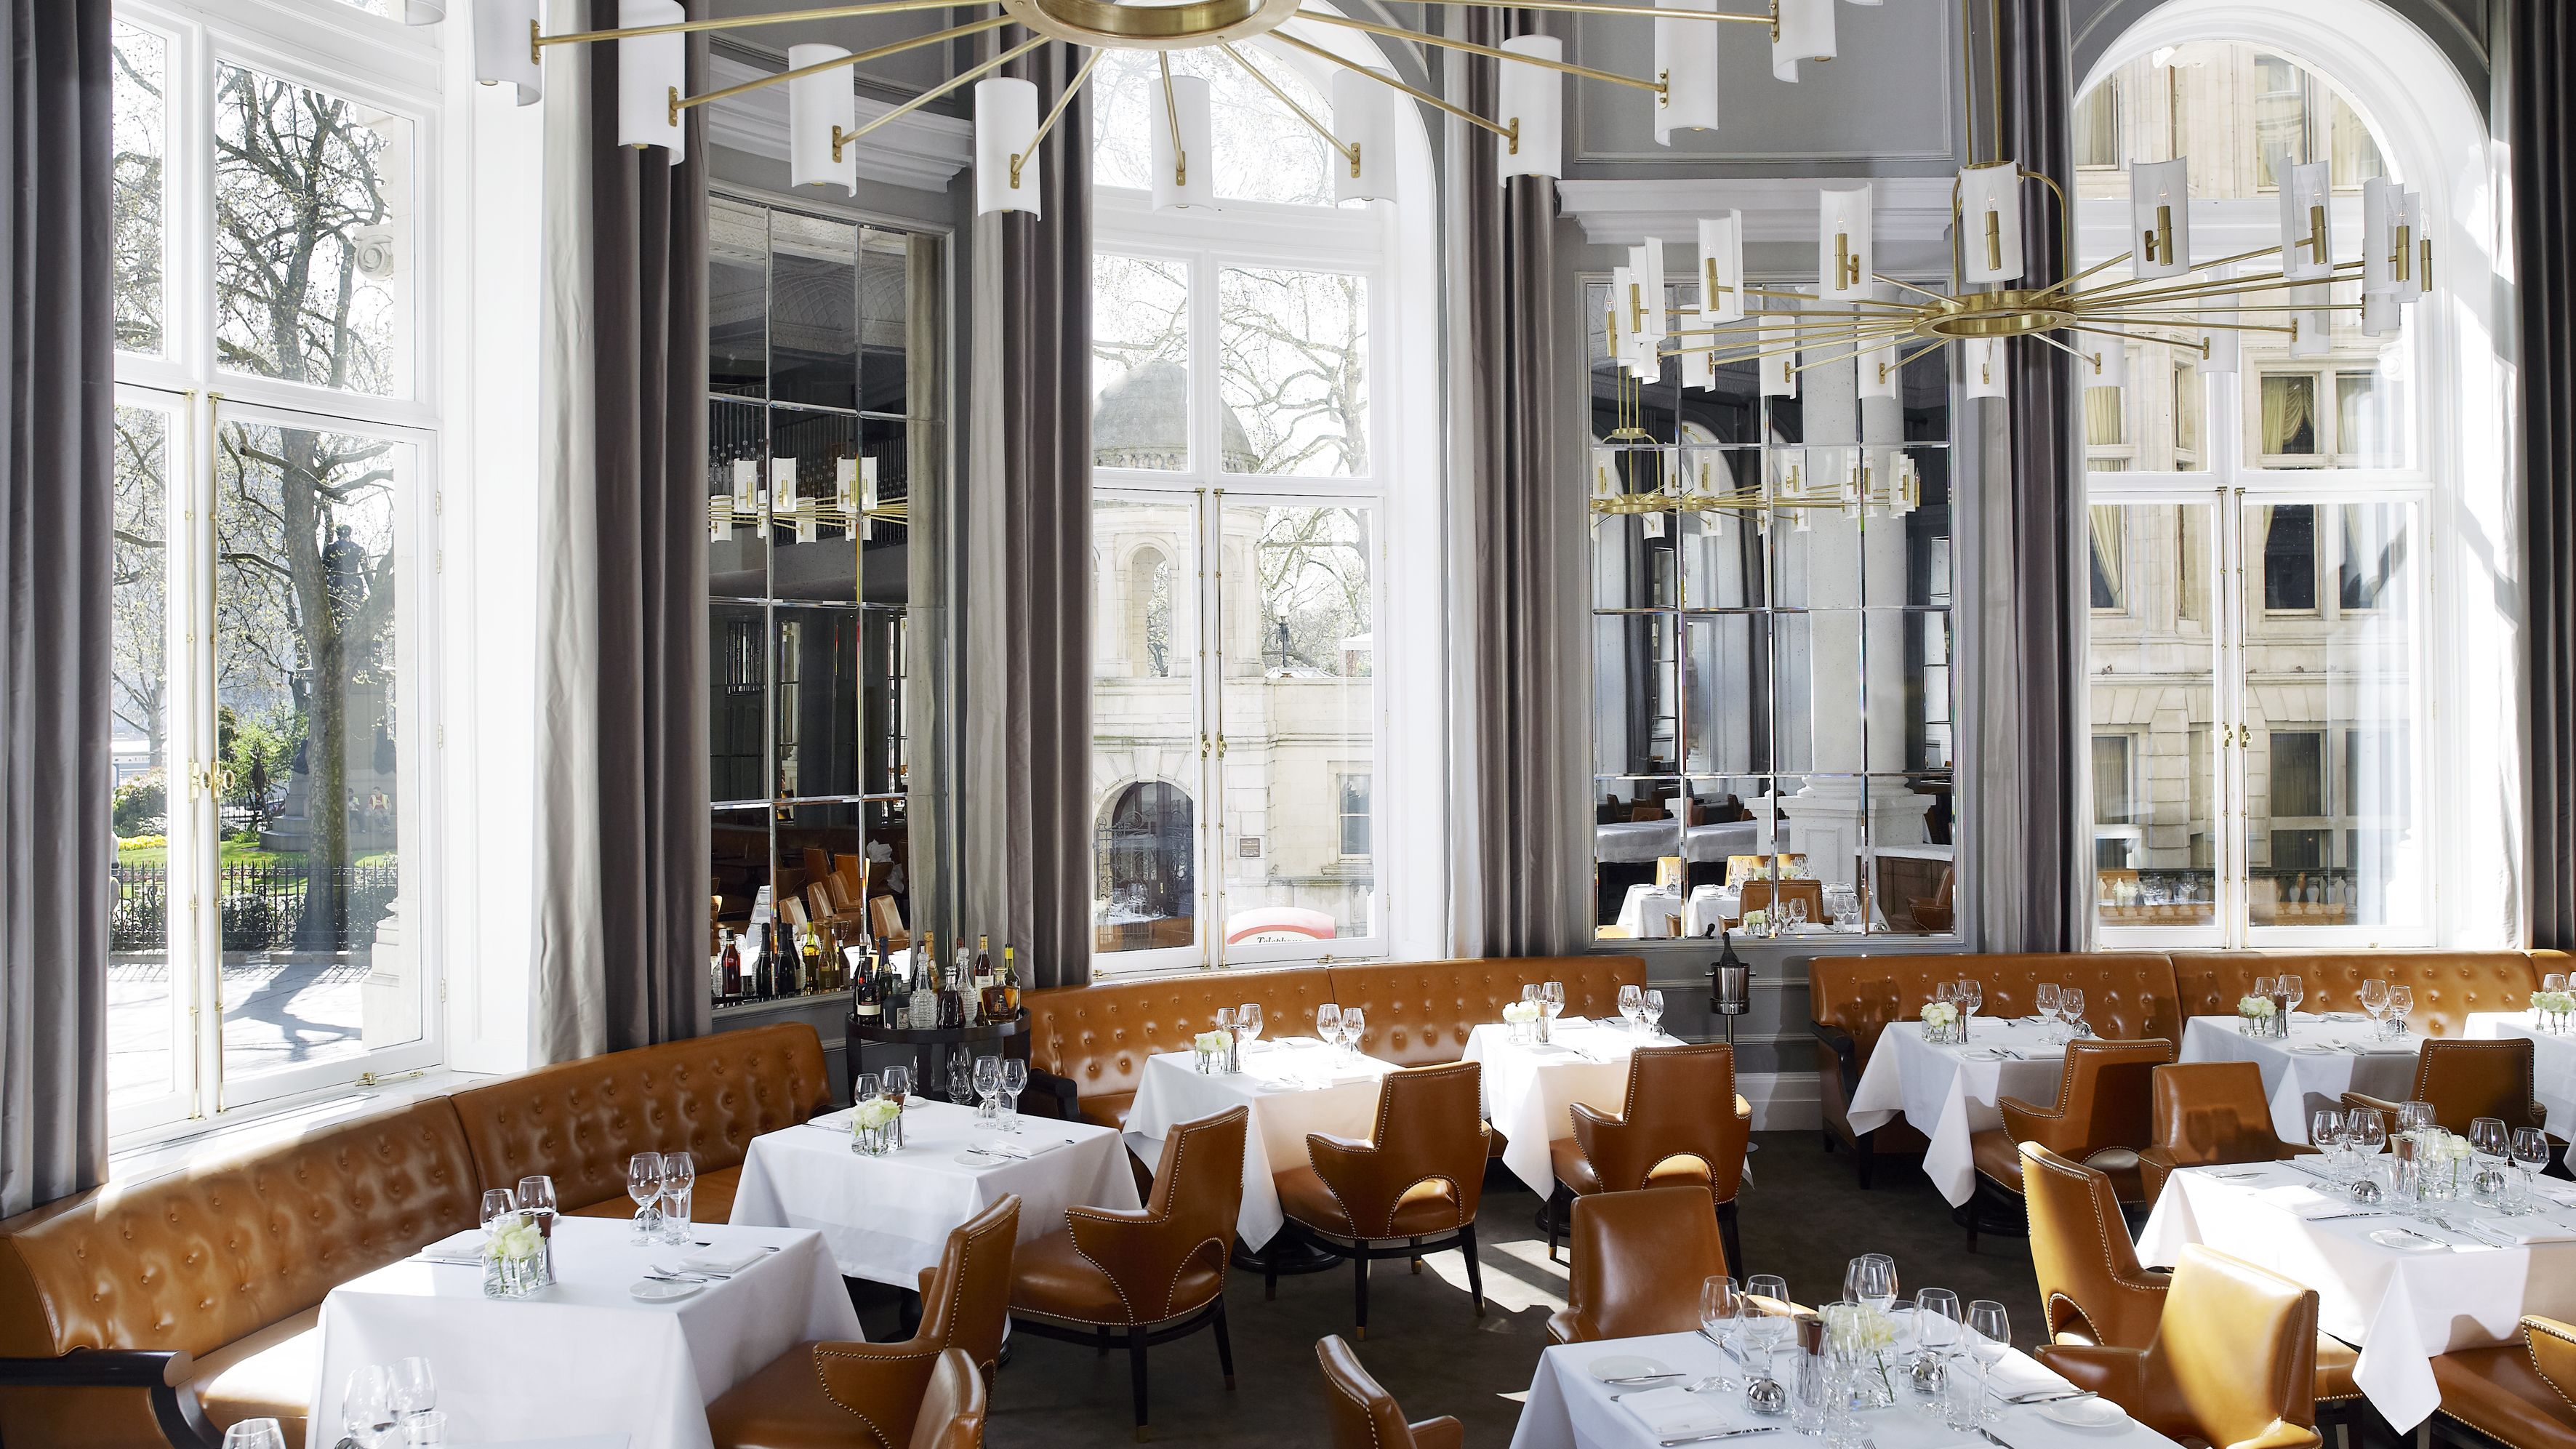 The Northall At Corinthia London In London Restaurant Reviews Menus And Prices Thefork